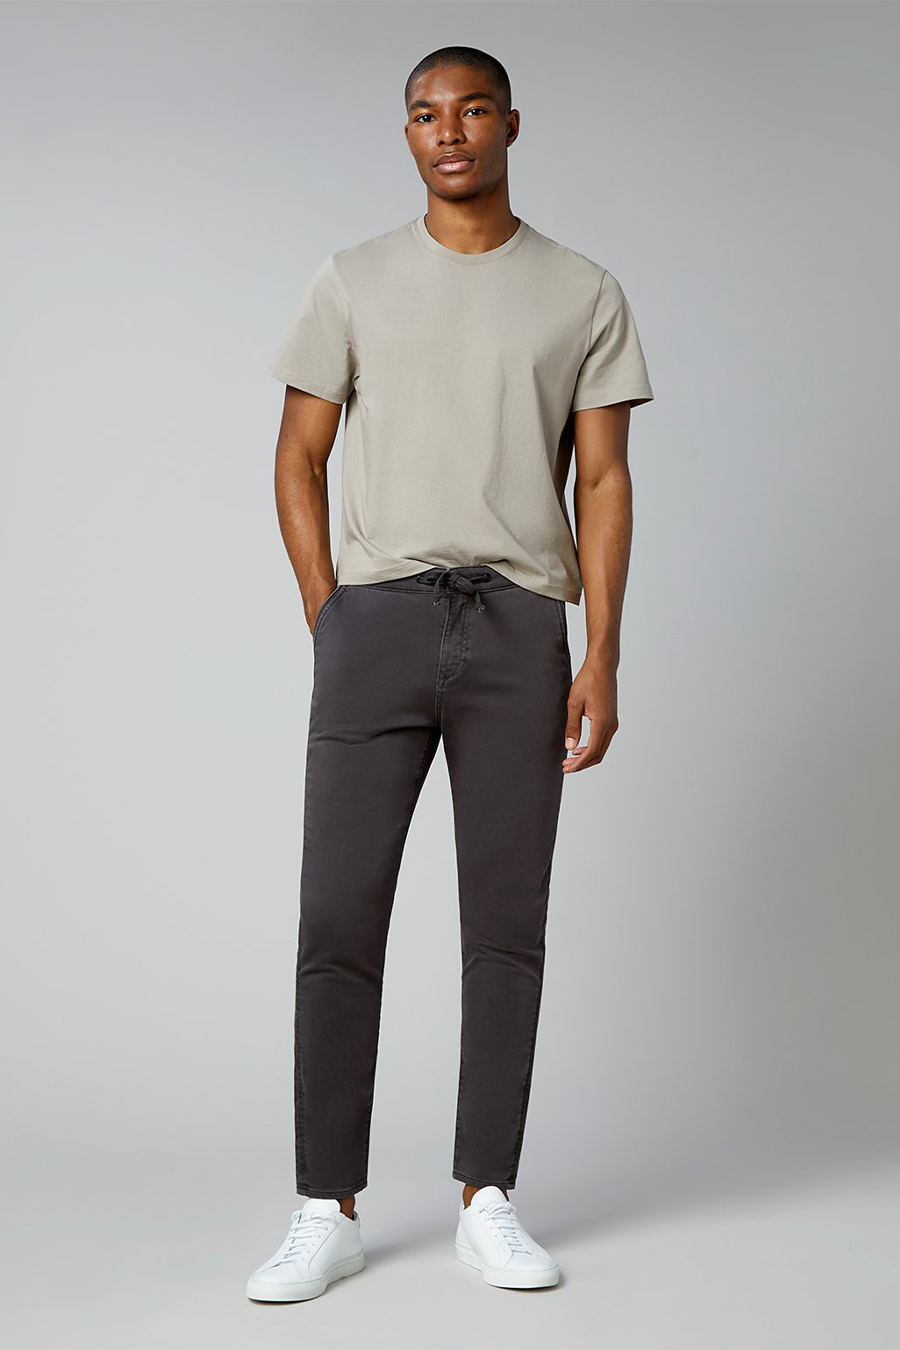 Jay Knit Track Chino | Dewey Stripe - Main Image Number 1 of 4